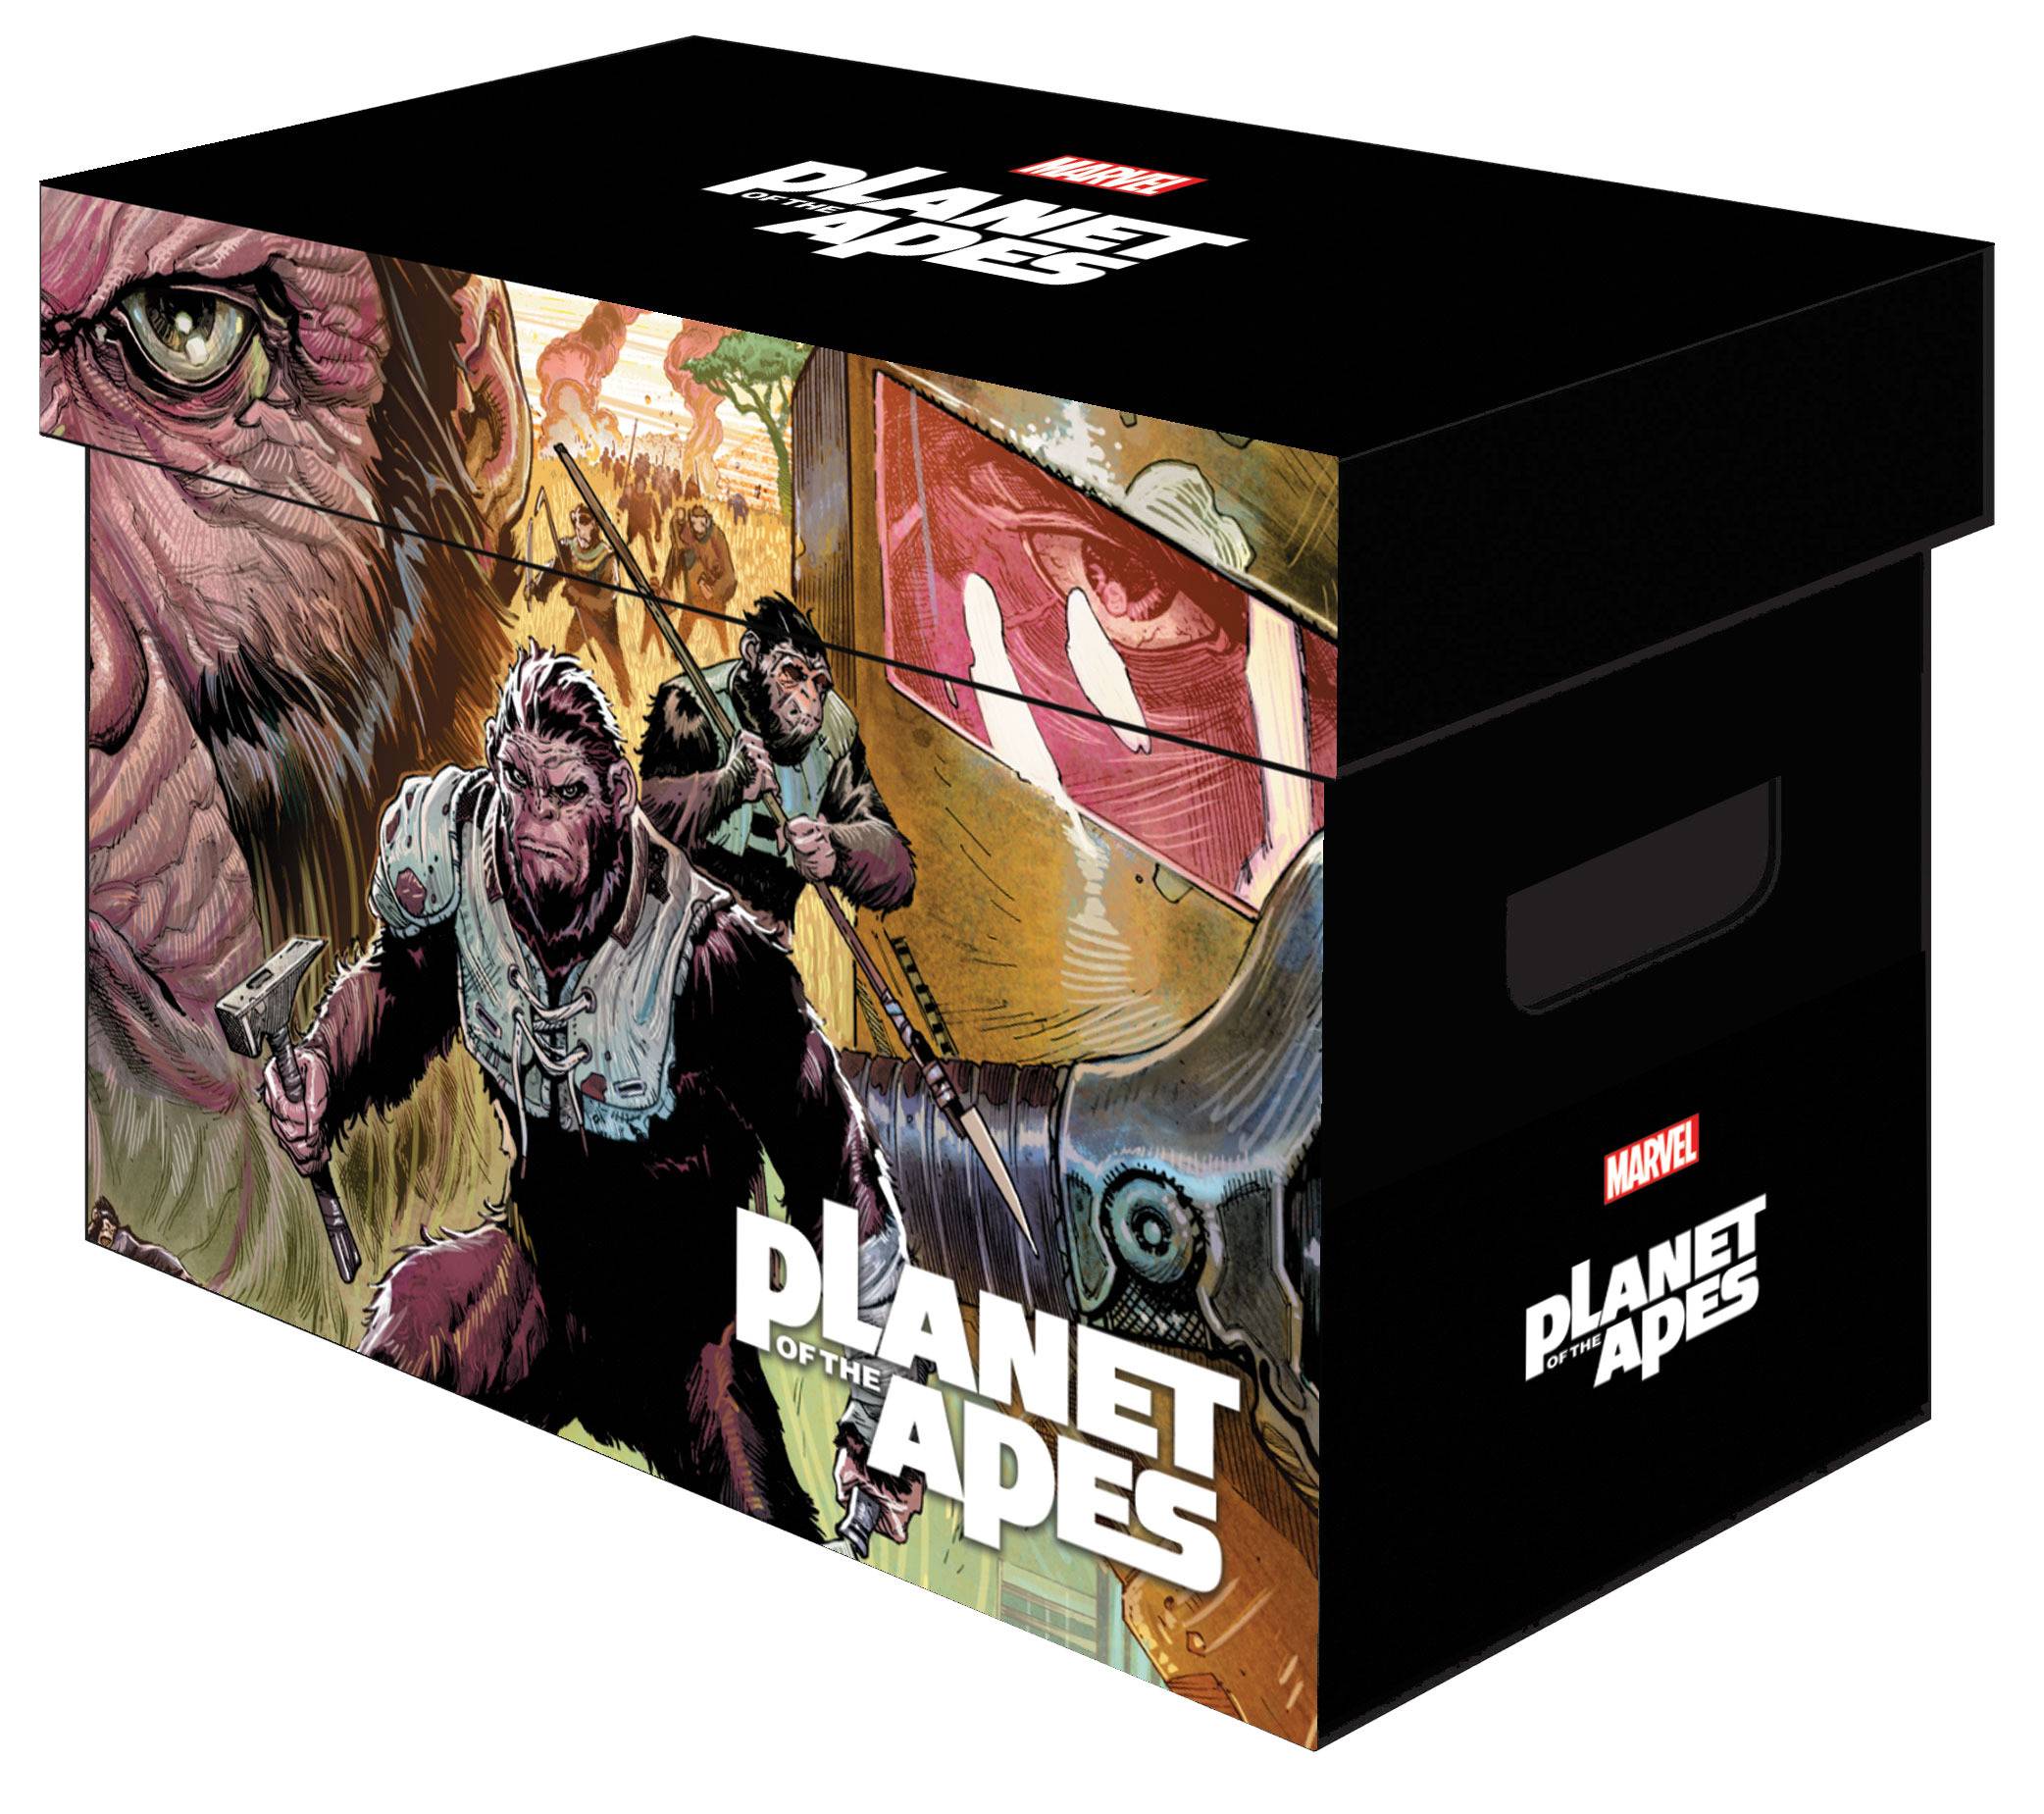 MARVEL GRAPHIC COMIC BOX PLANET OF THE APES (BUNDLES OF 5)